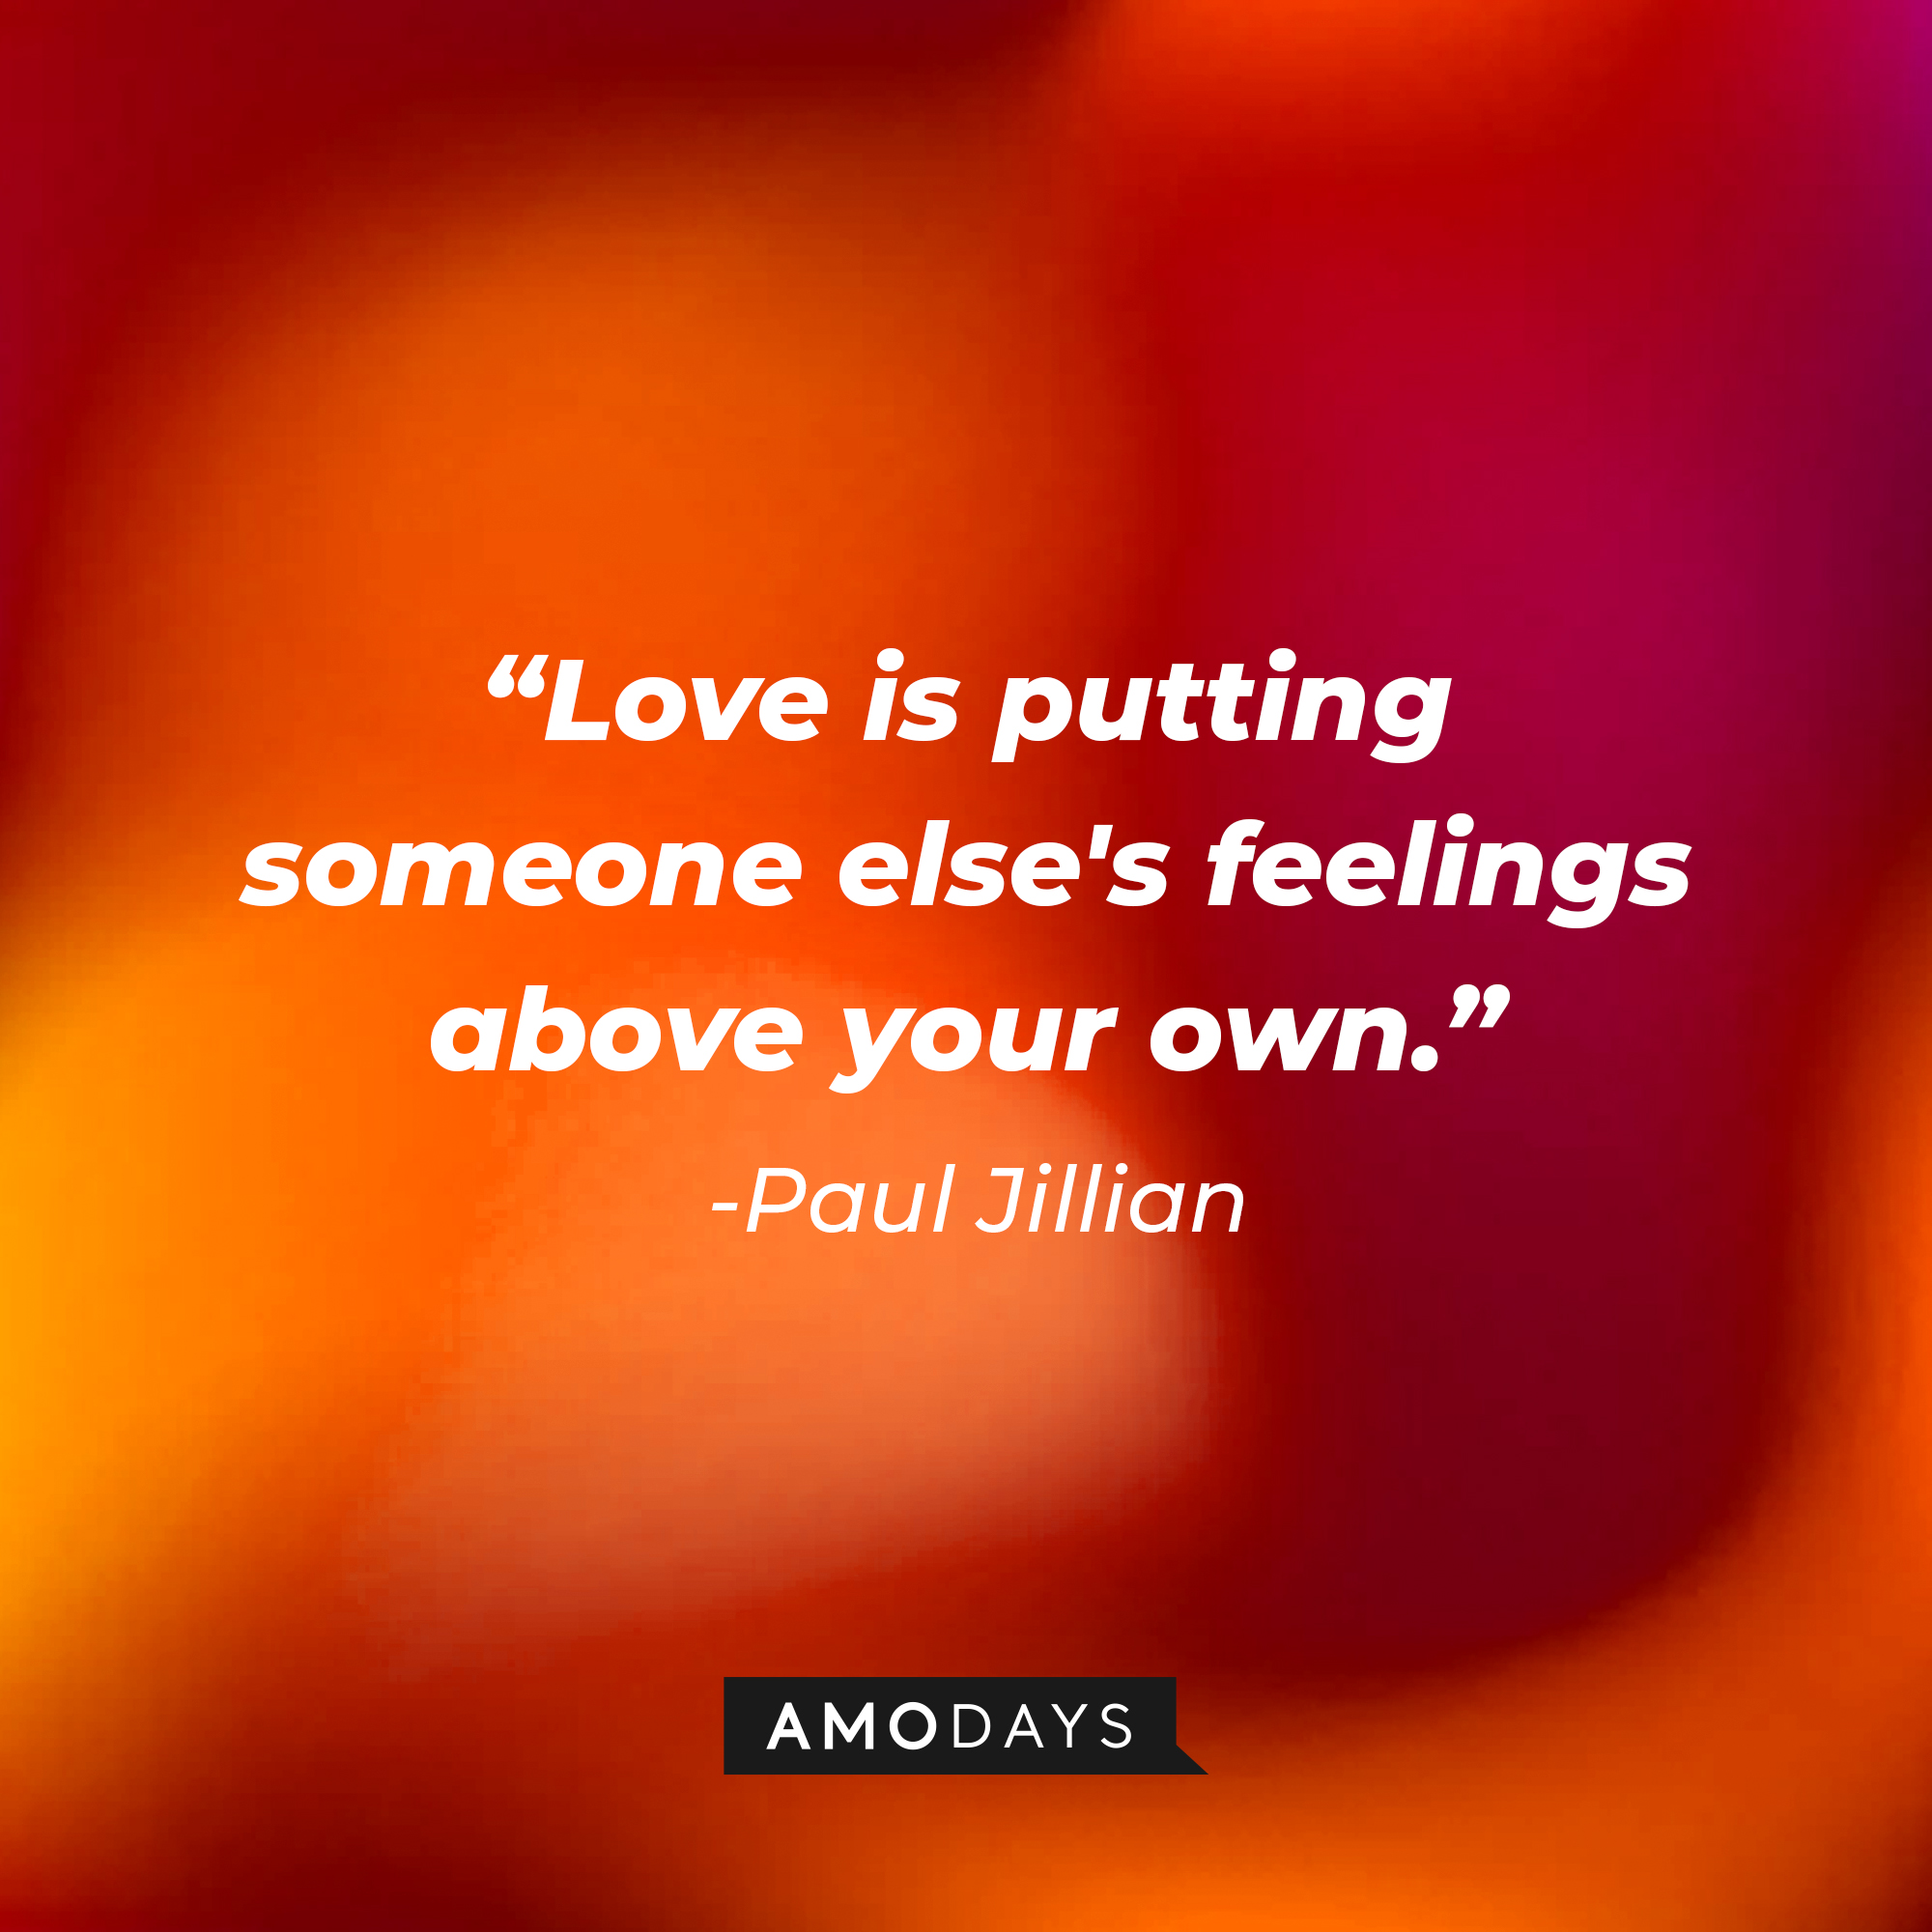 Paul Jillian’s quote: “Love is putting someone else's feelings above your own.” | Source: AmoDays